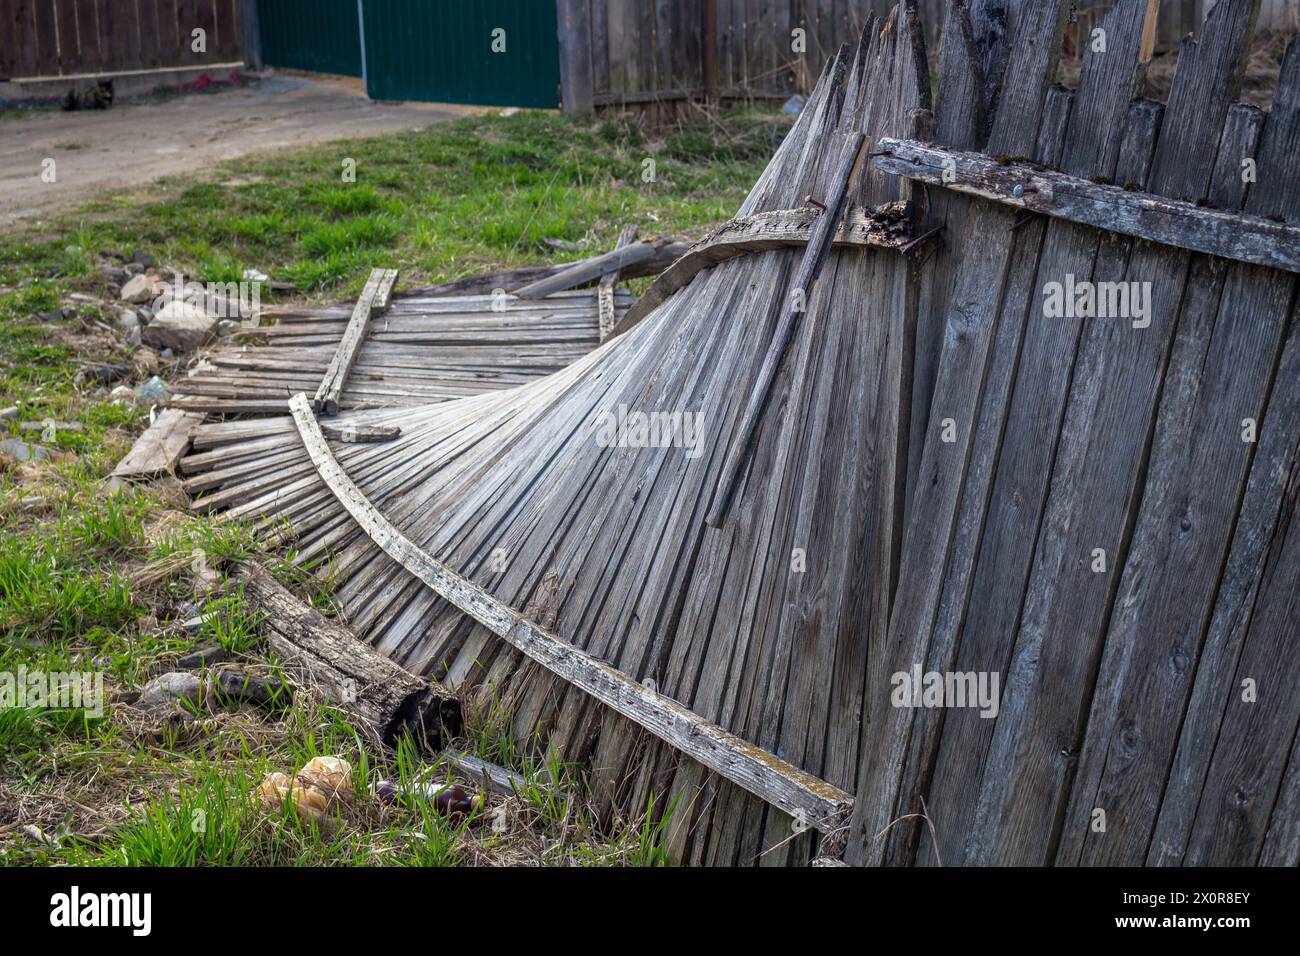 The fallen broken wooden fence, abstract view Stock Photo